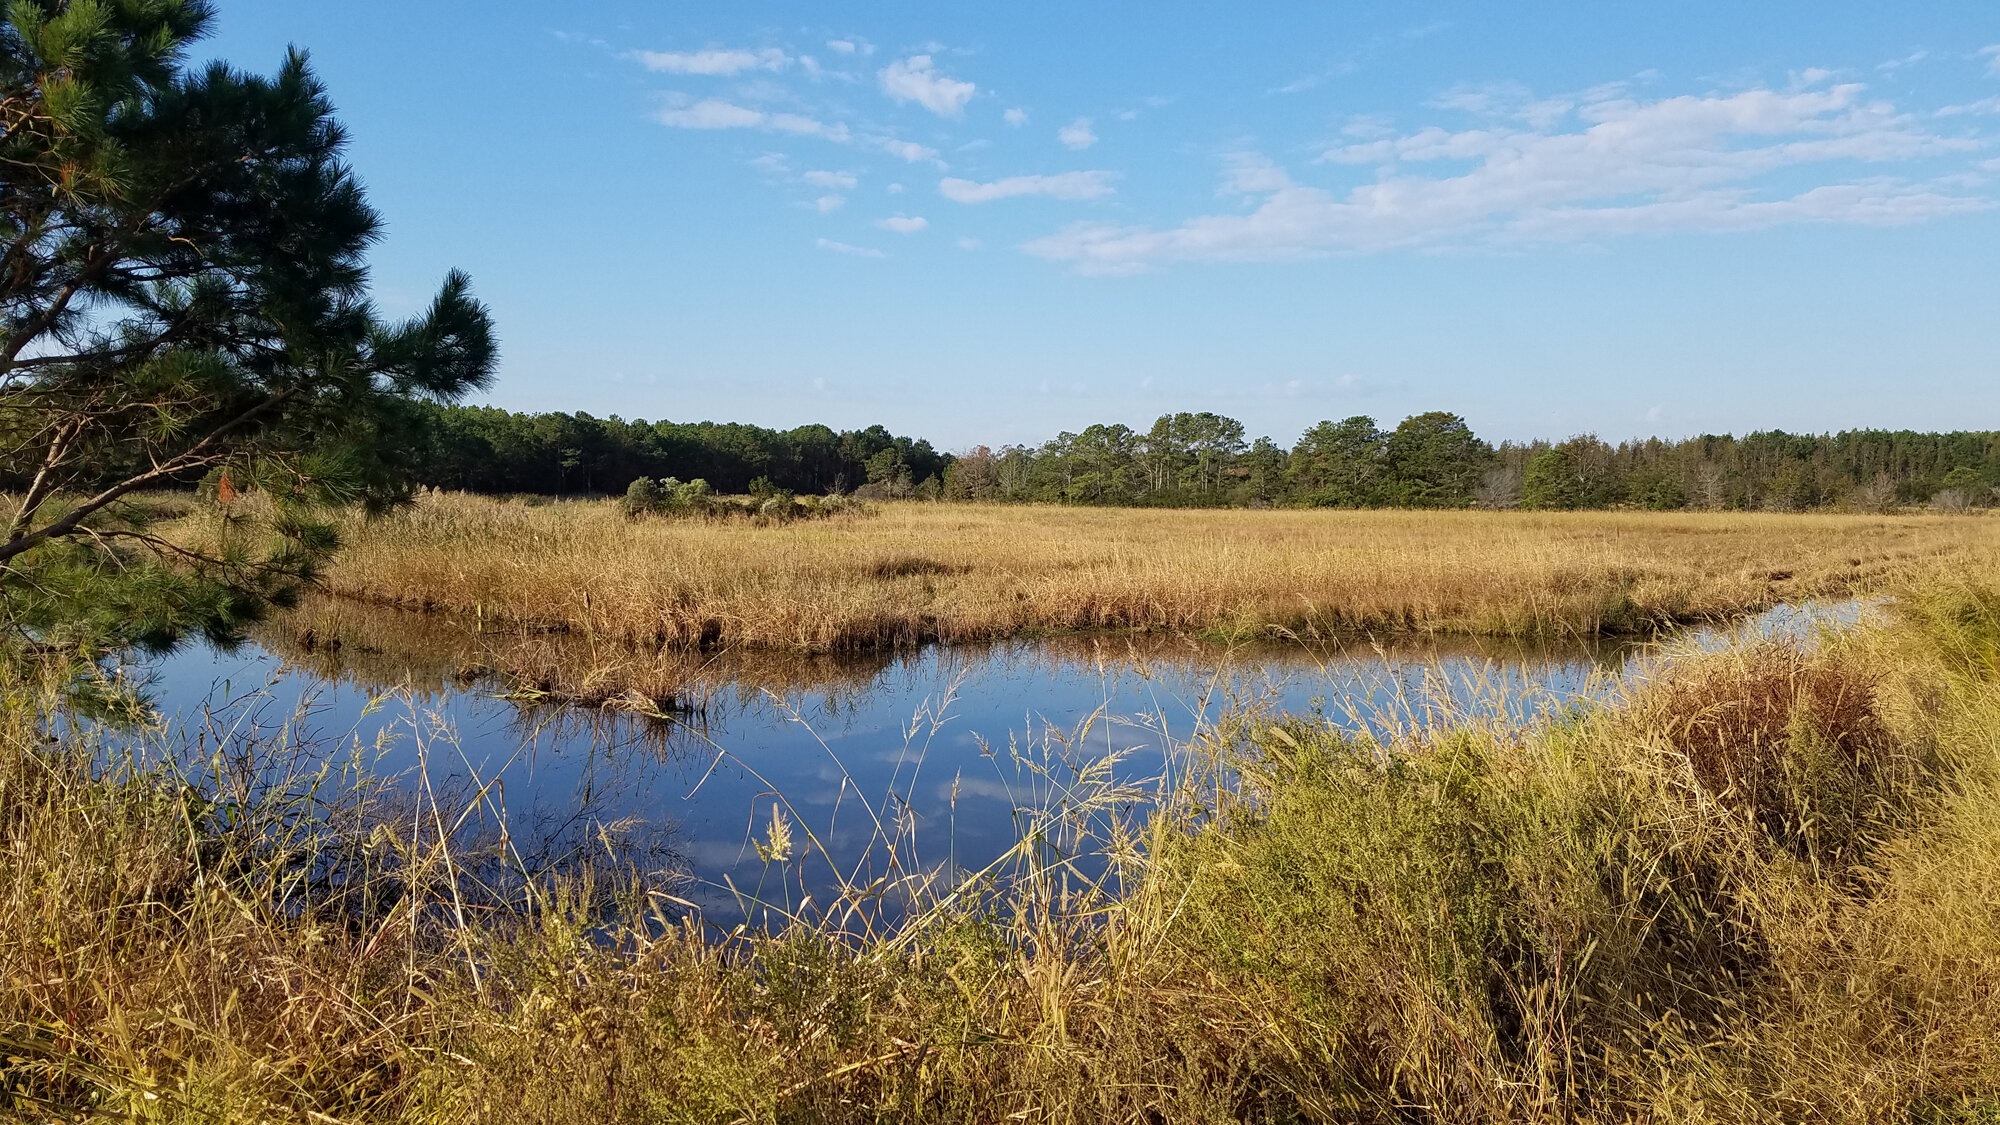  Whitehurst Tract’s northern impoundments on 13 Oct. 